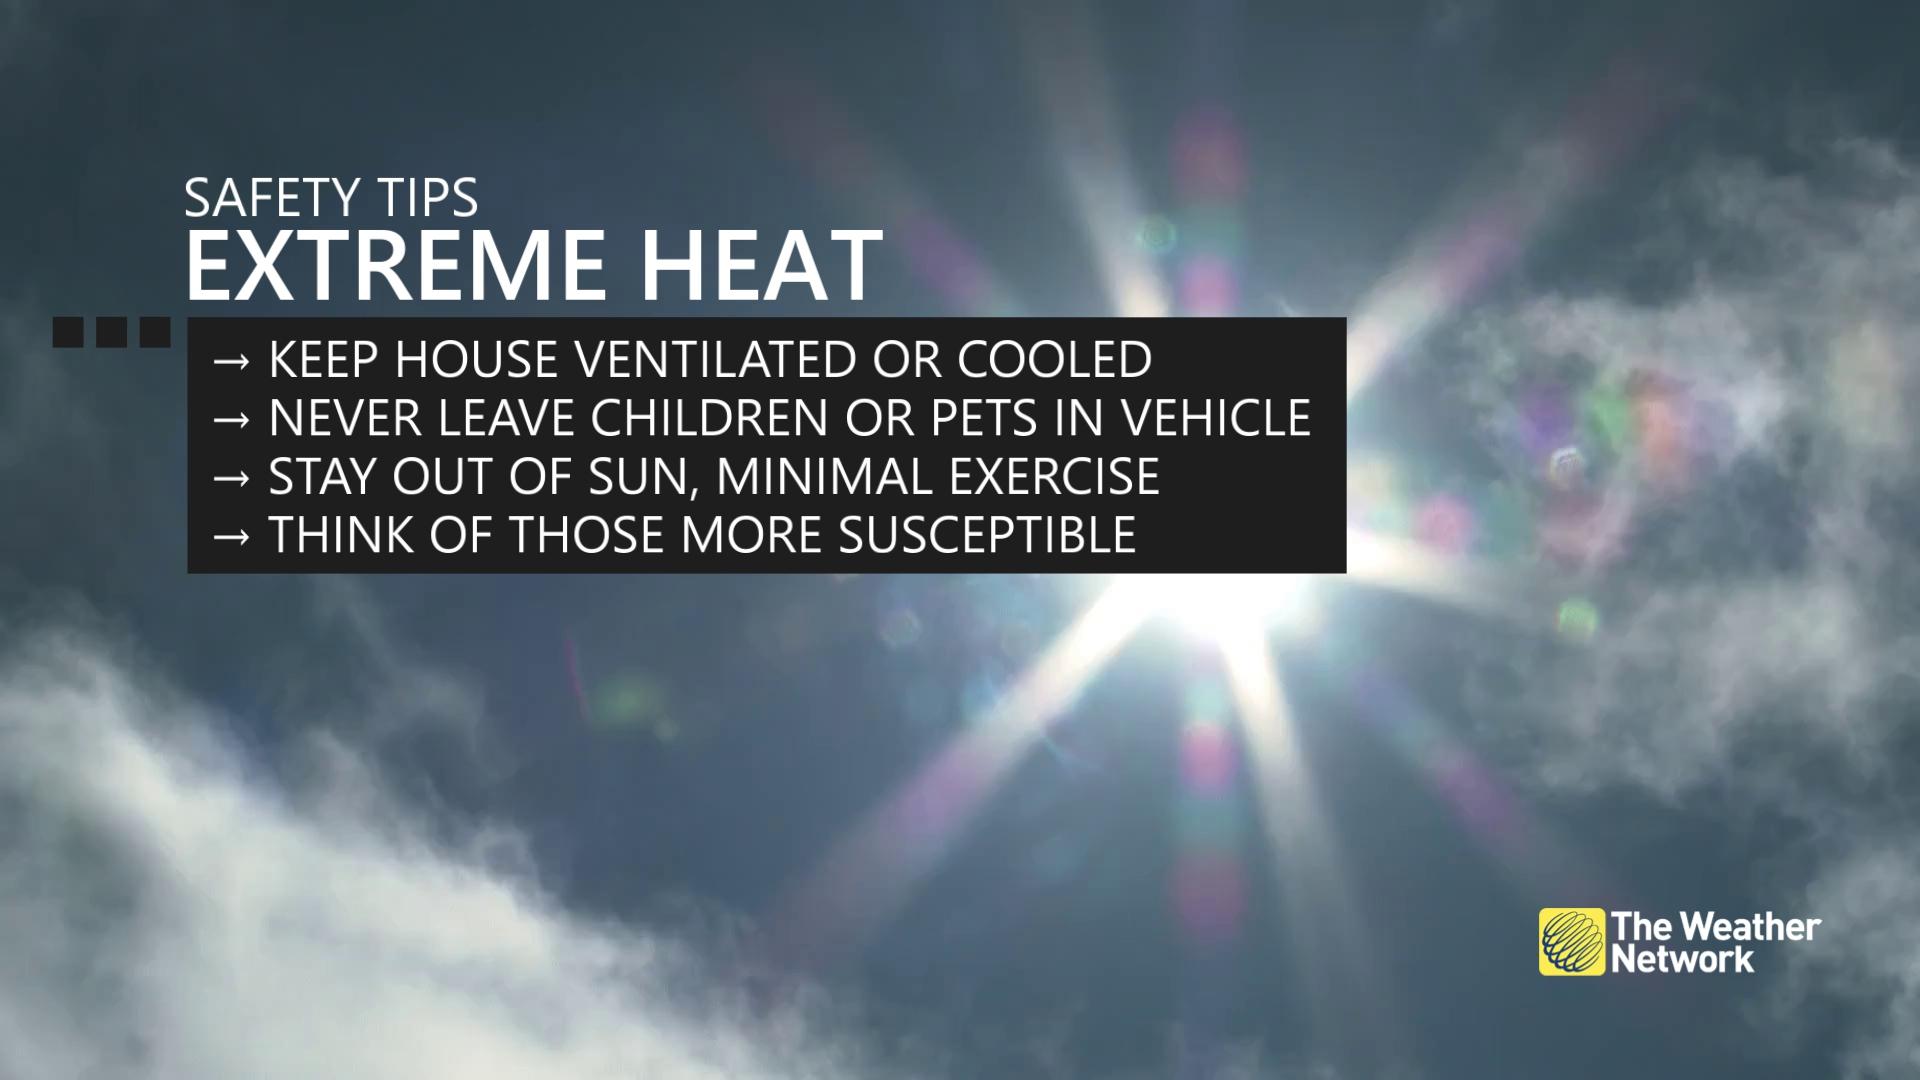 Extreme heat safety tips